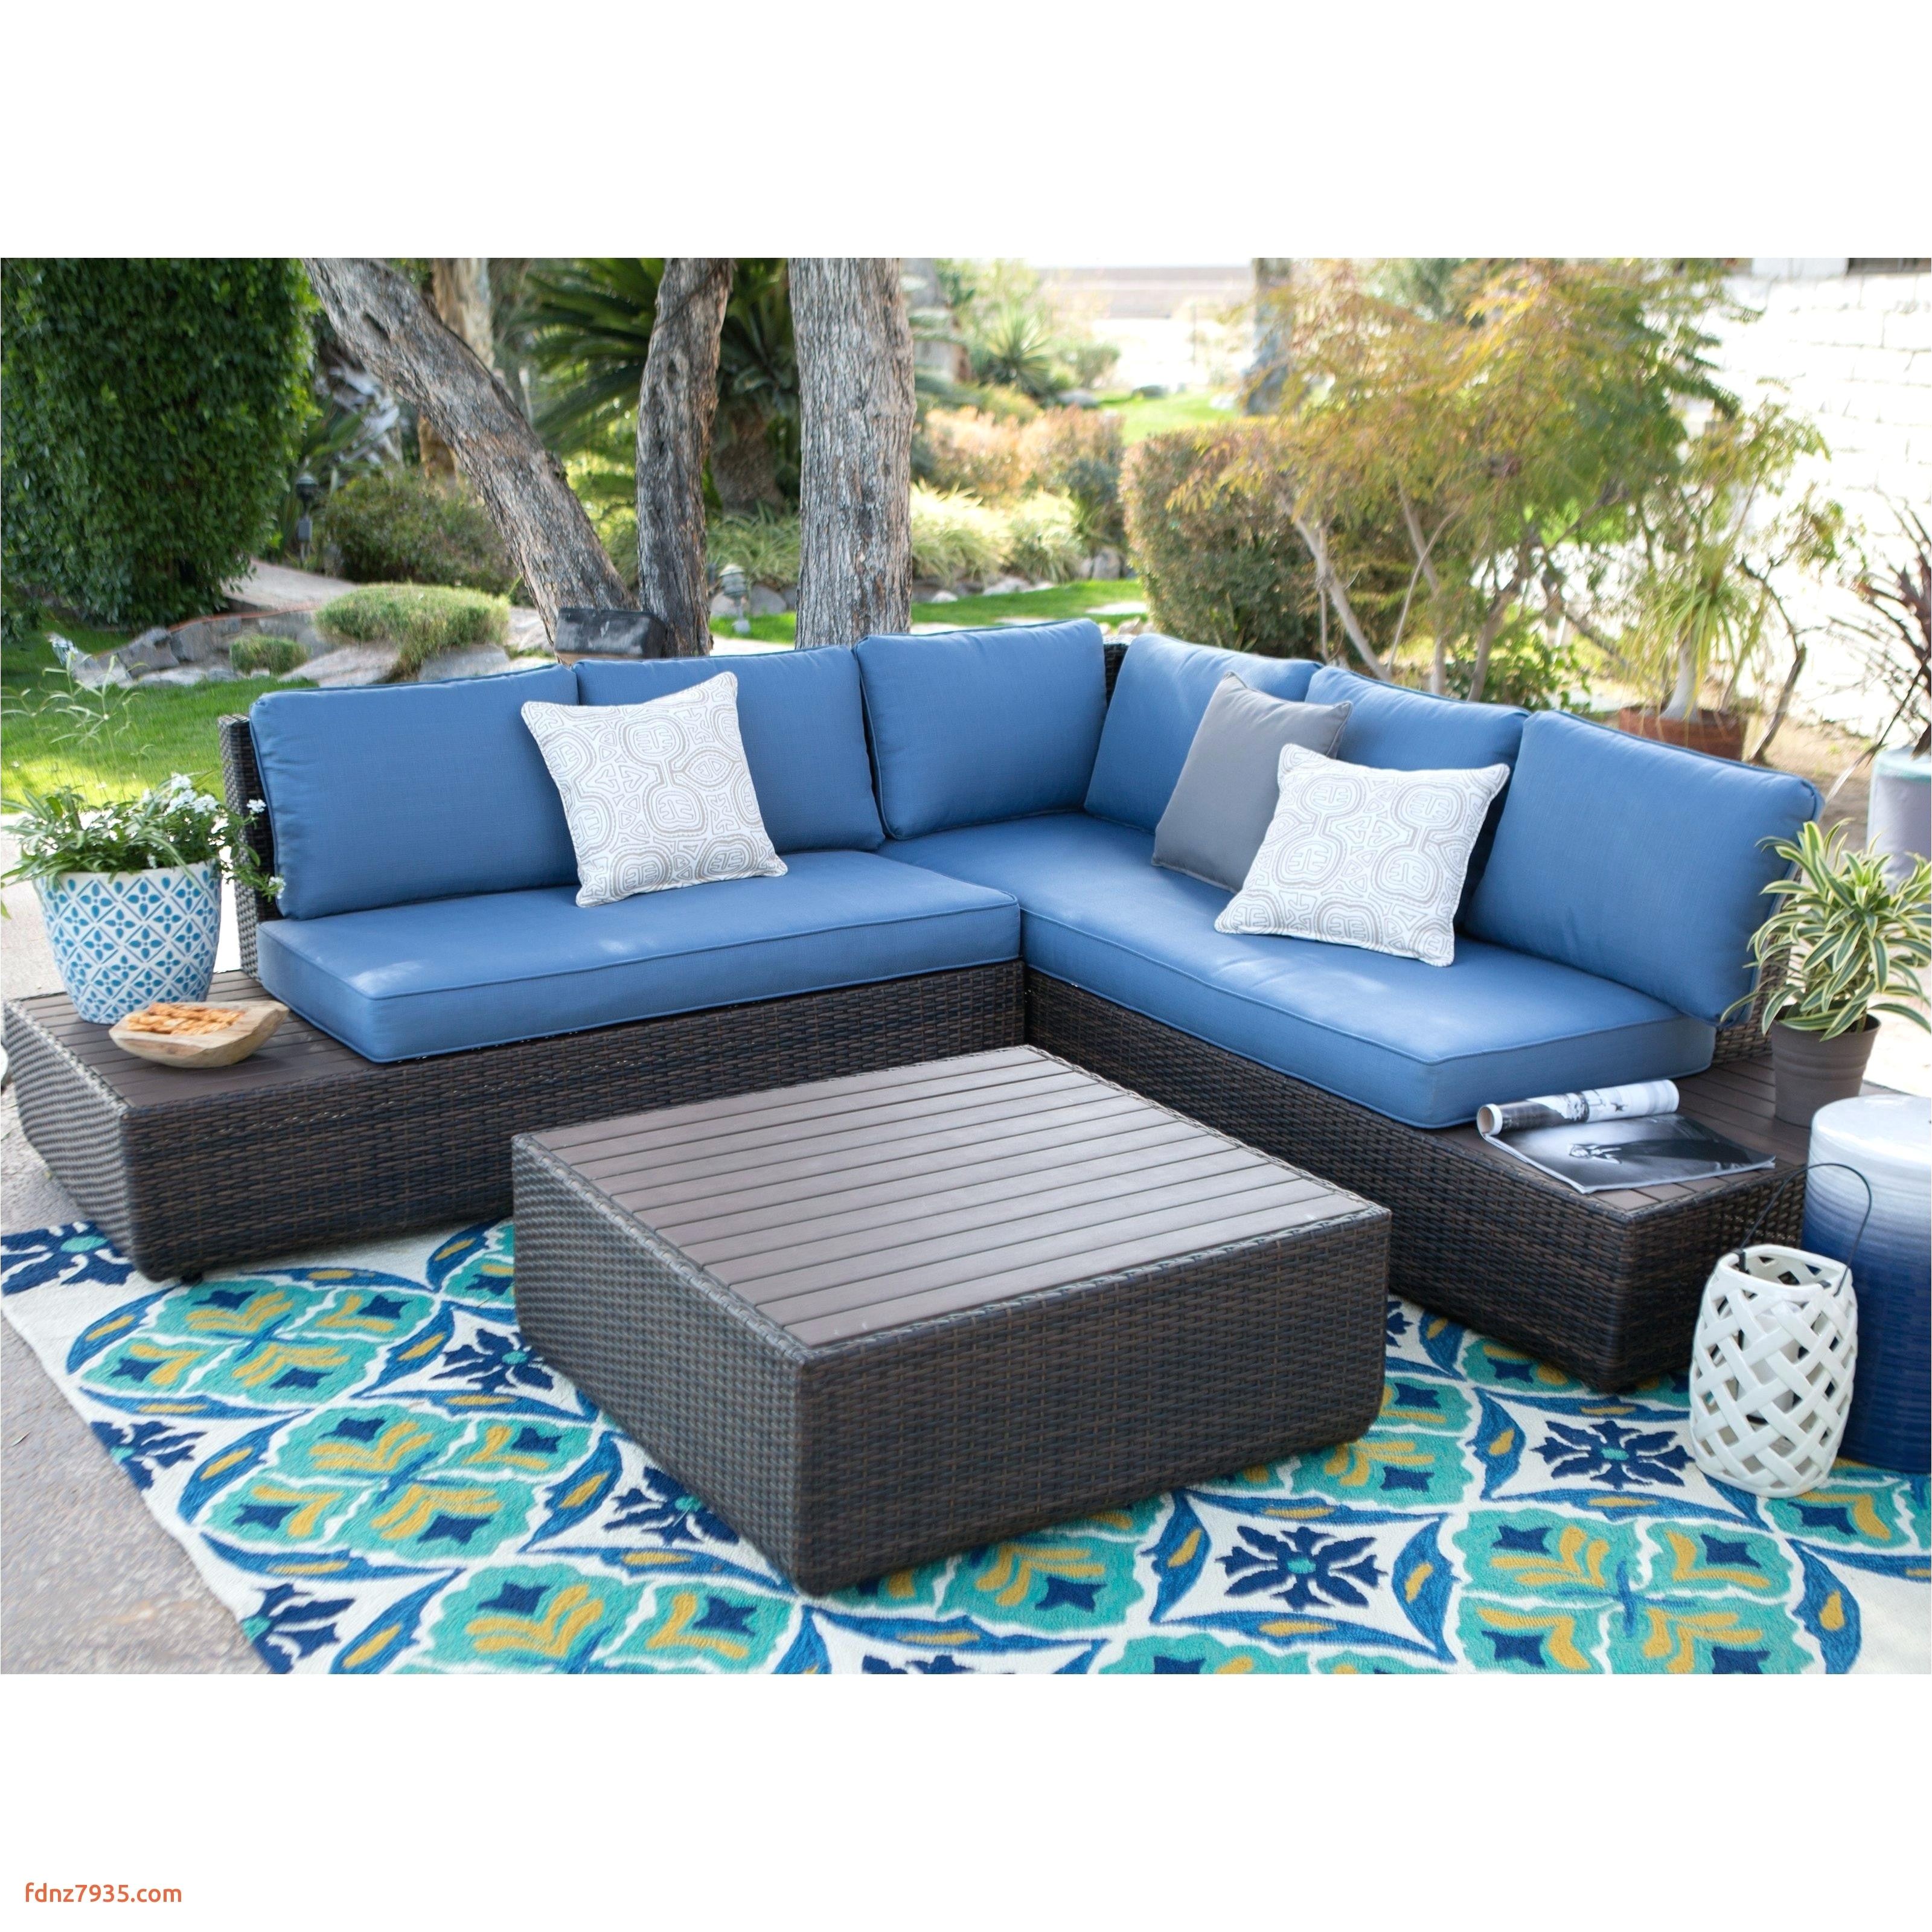 outdoor patio table cover luxury patio furniture cover best wicker outdoor sofa 0d patio chairs